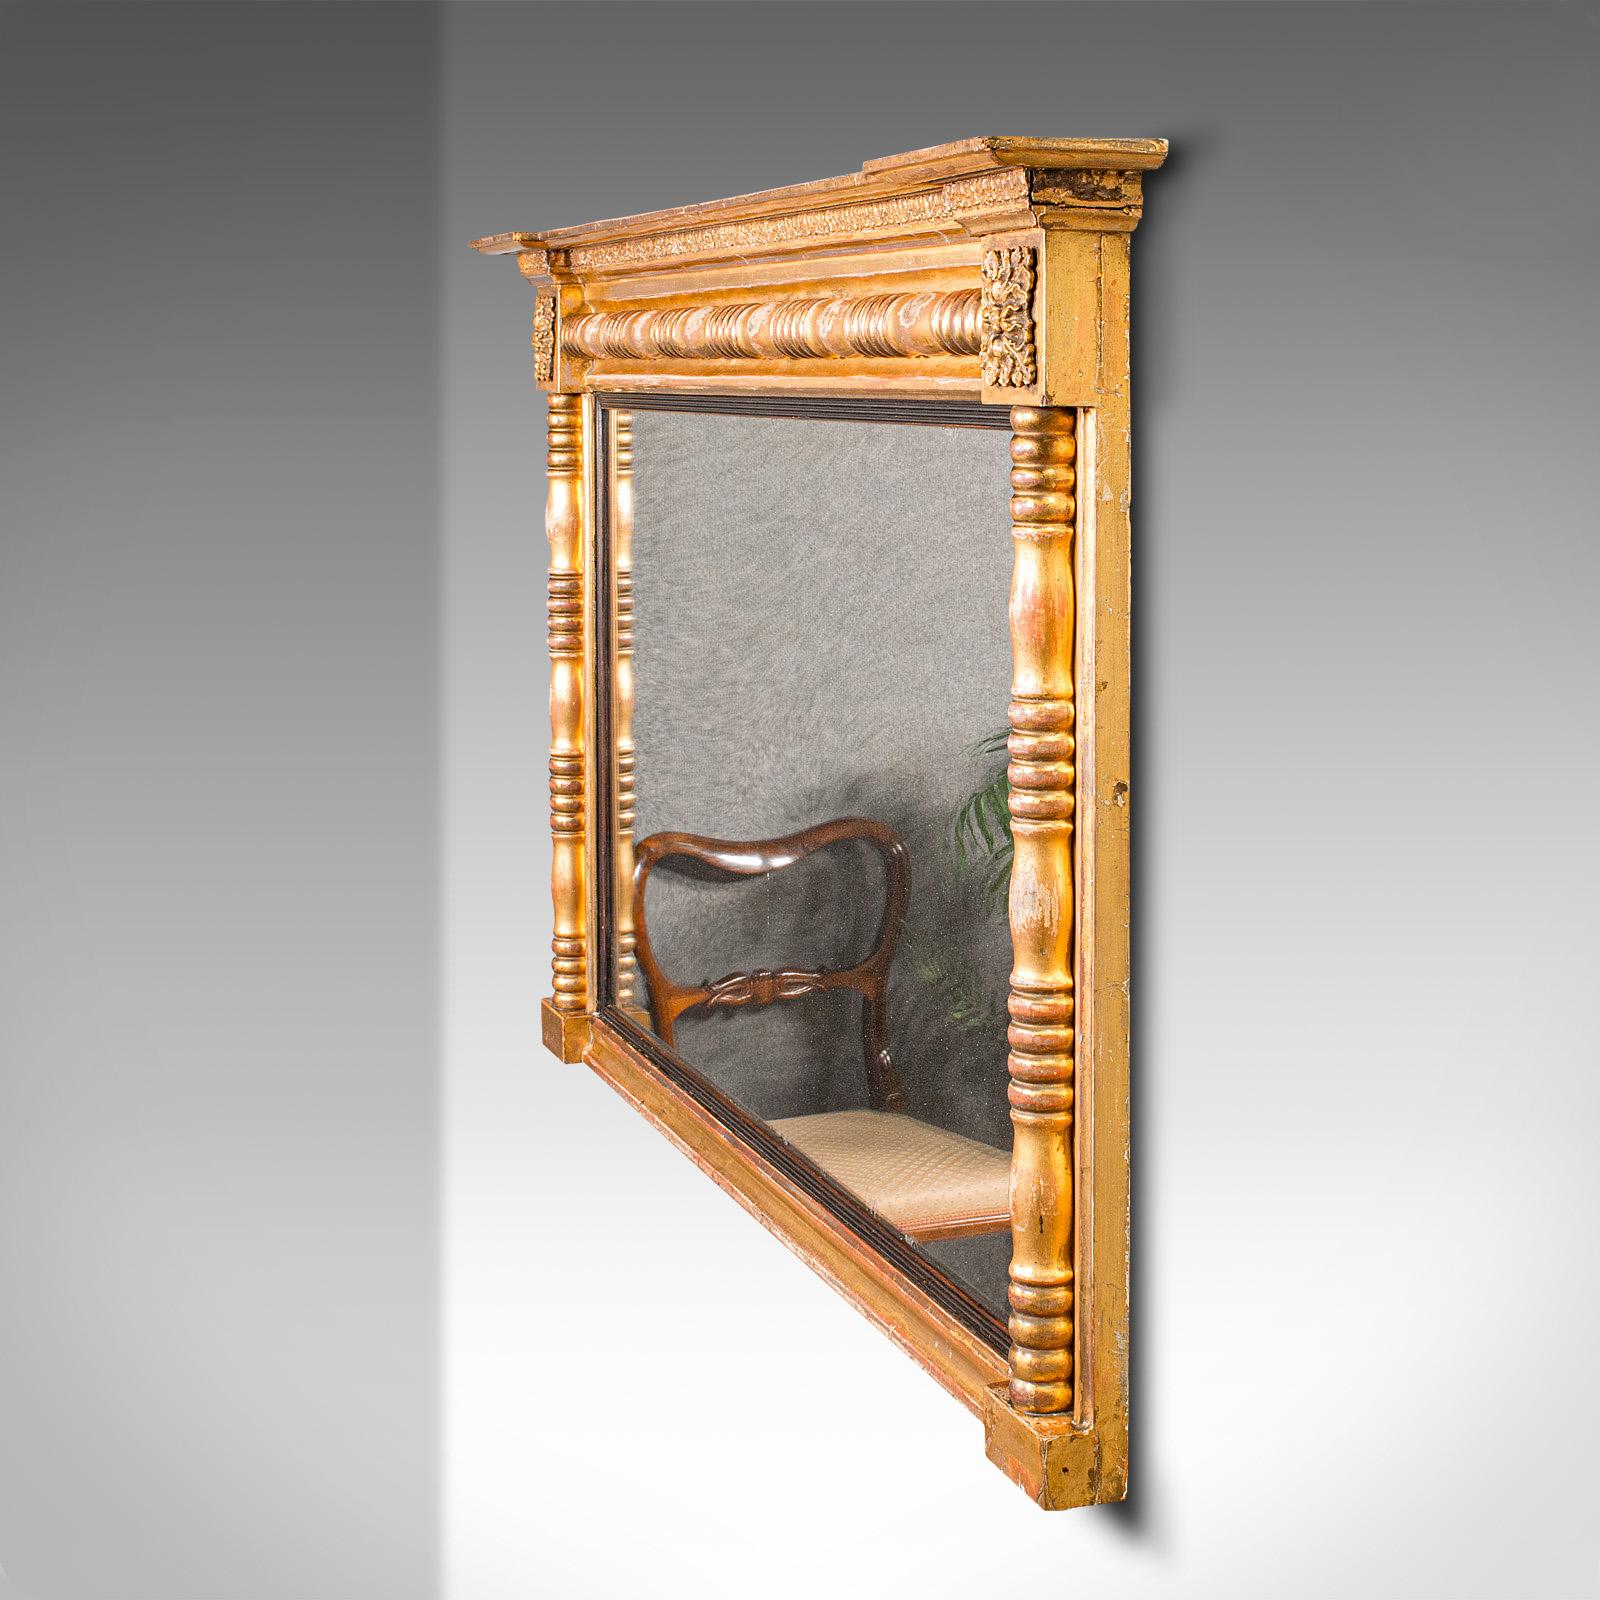 British Large Antique Overmantle Mirror, English, Giltwood, Mercury Glass, Regency, 1820 For Sale